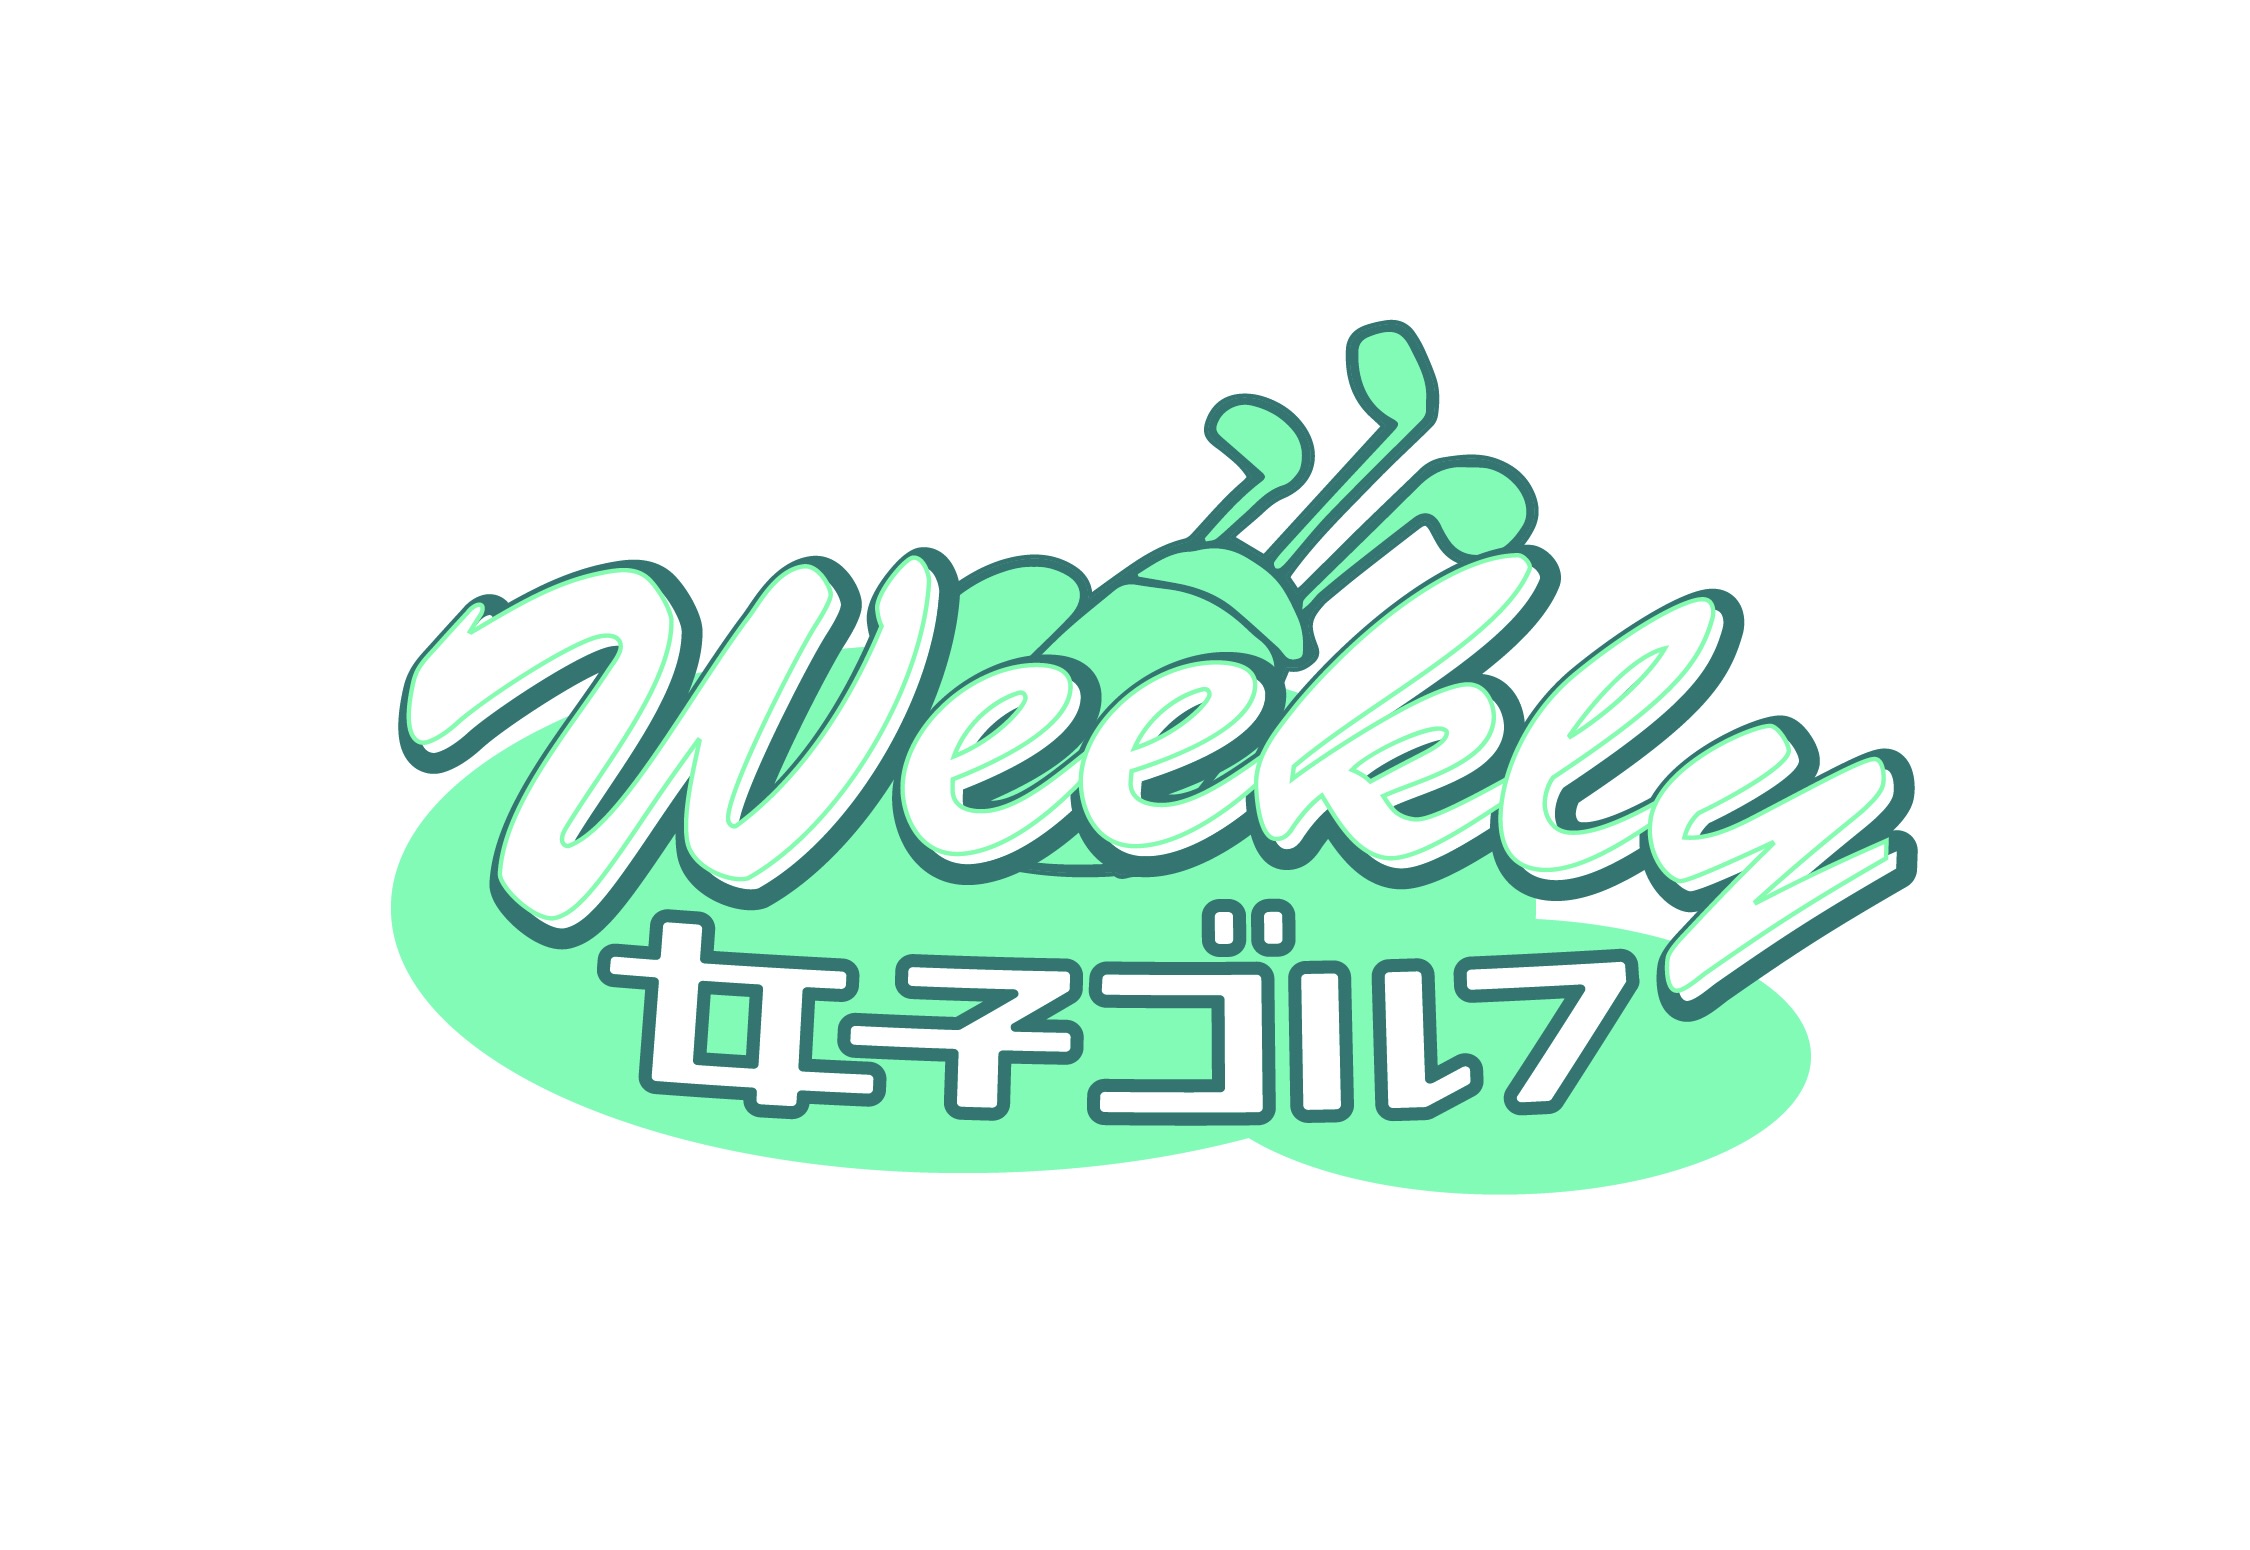 Weekly女子ゴルフ